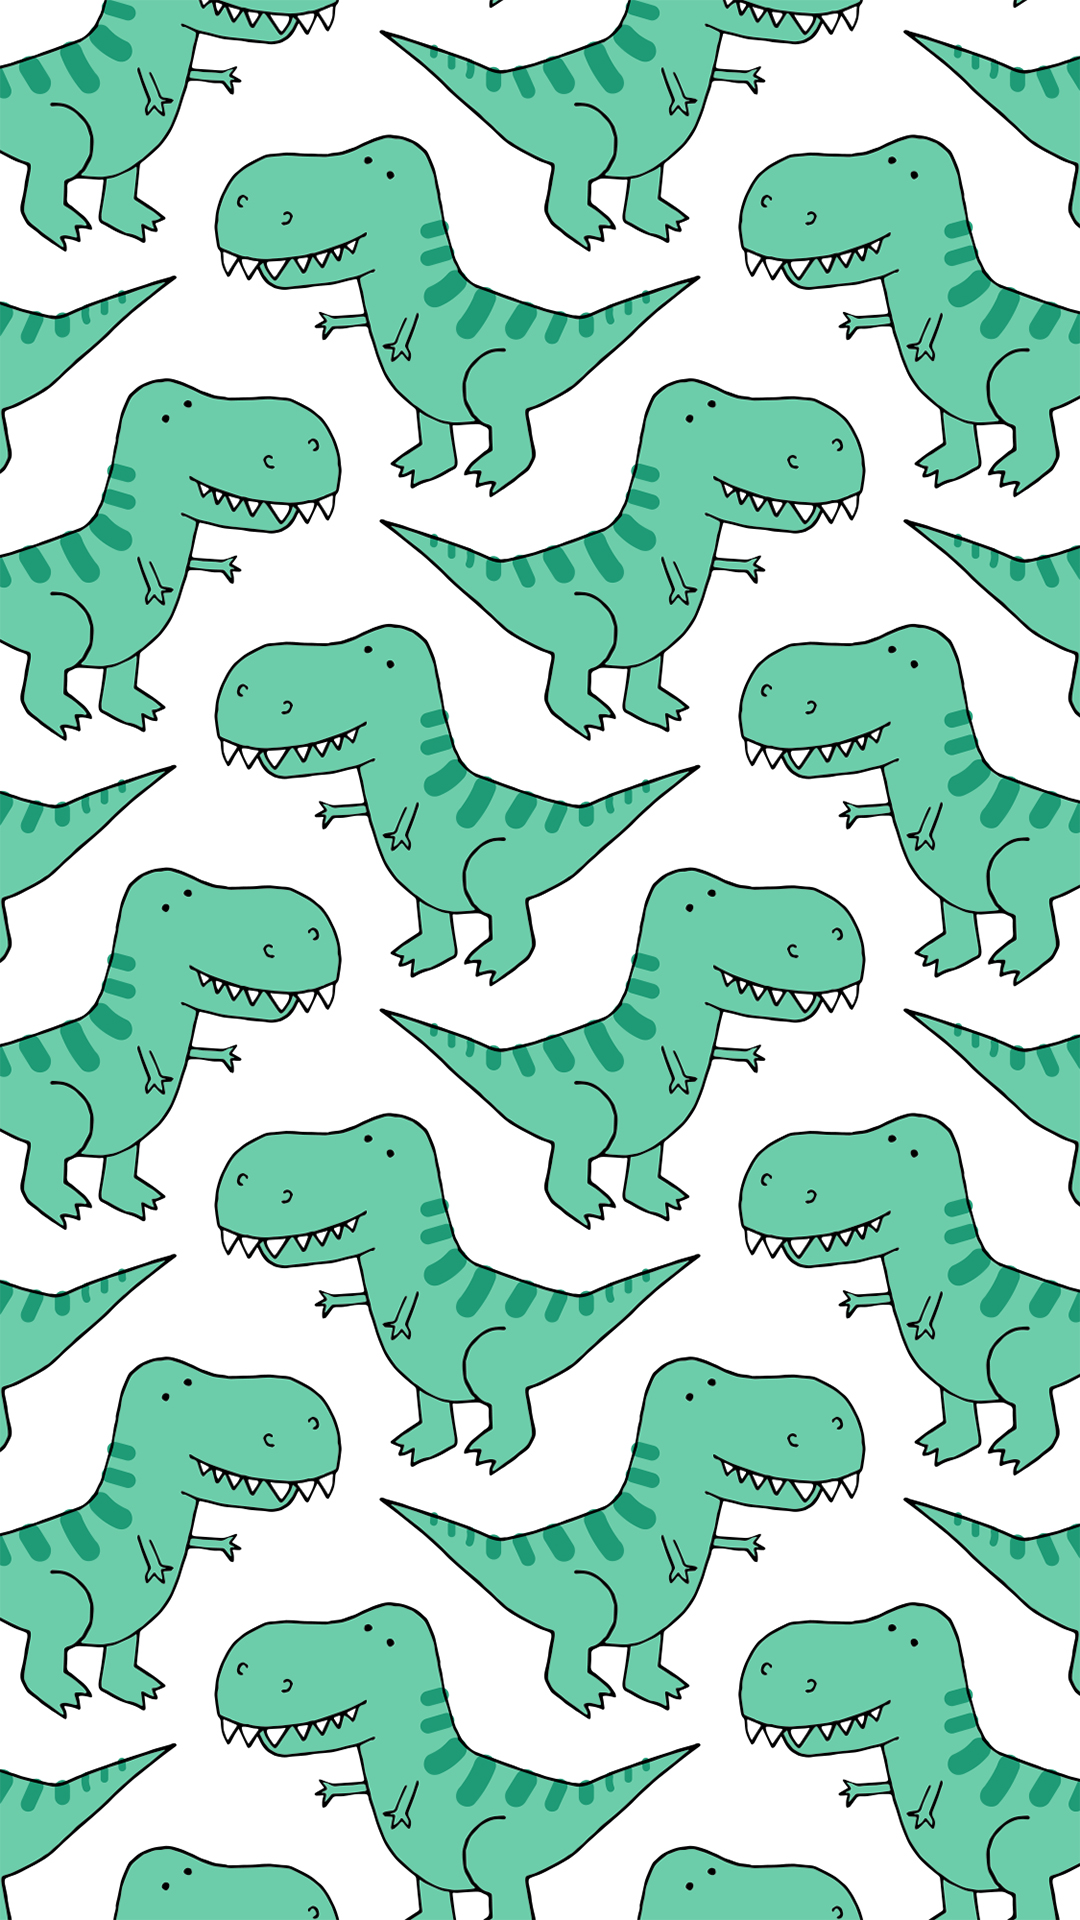 Aesthetic Cute Dino Wallpapers